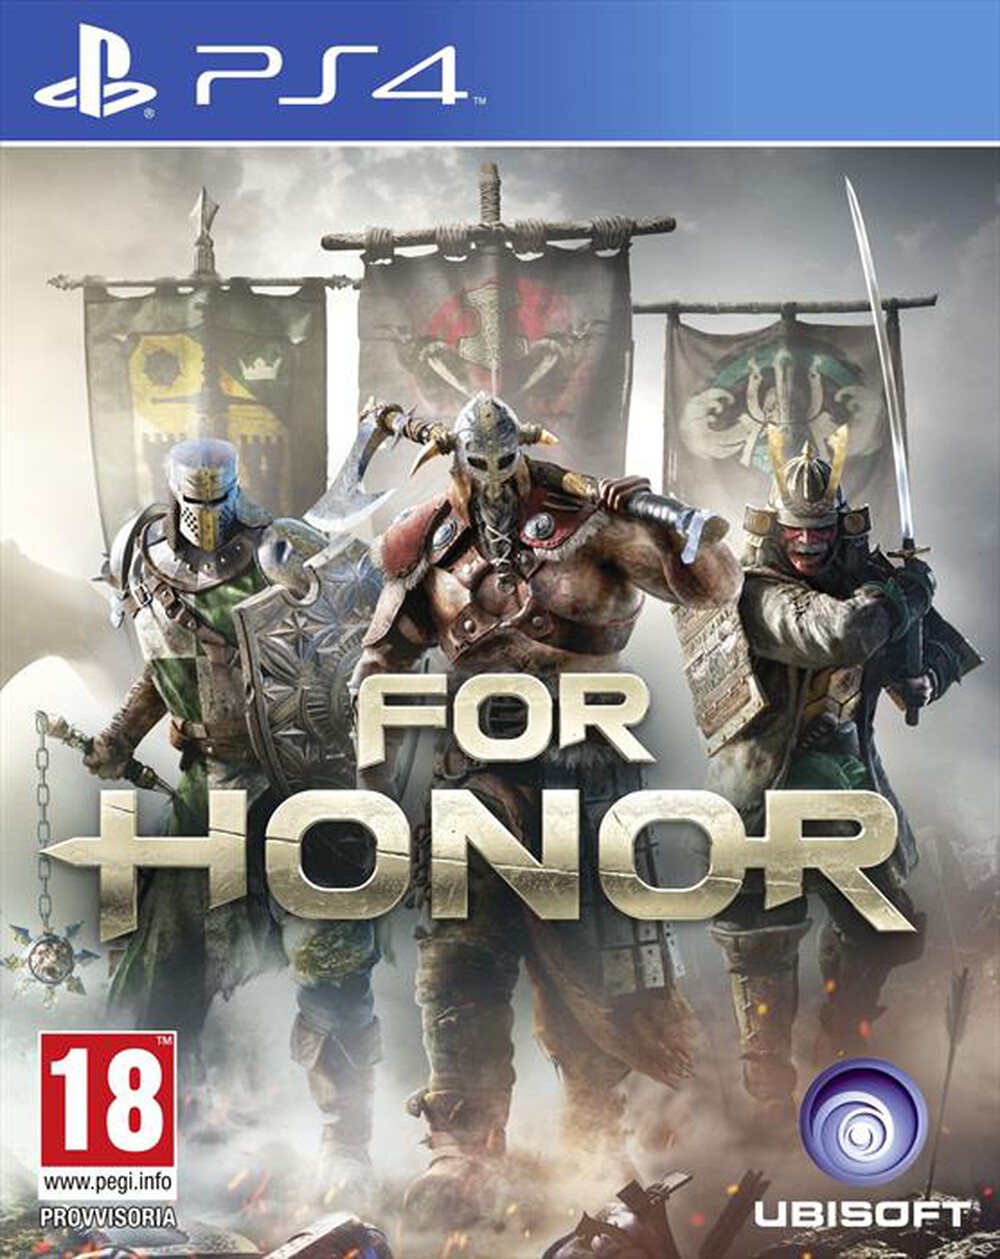 "UBISOFT - For Honor Ps4"